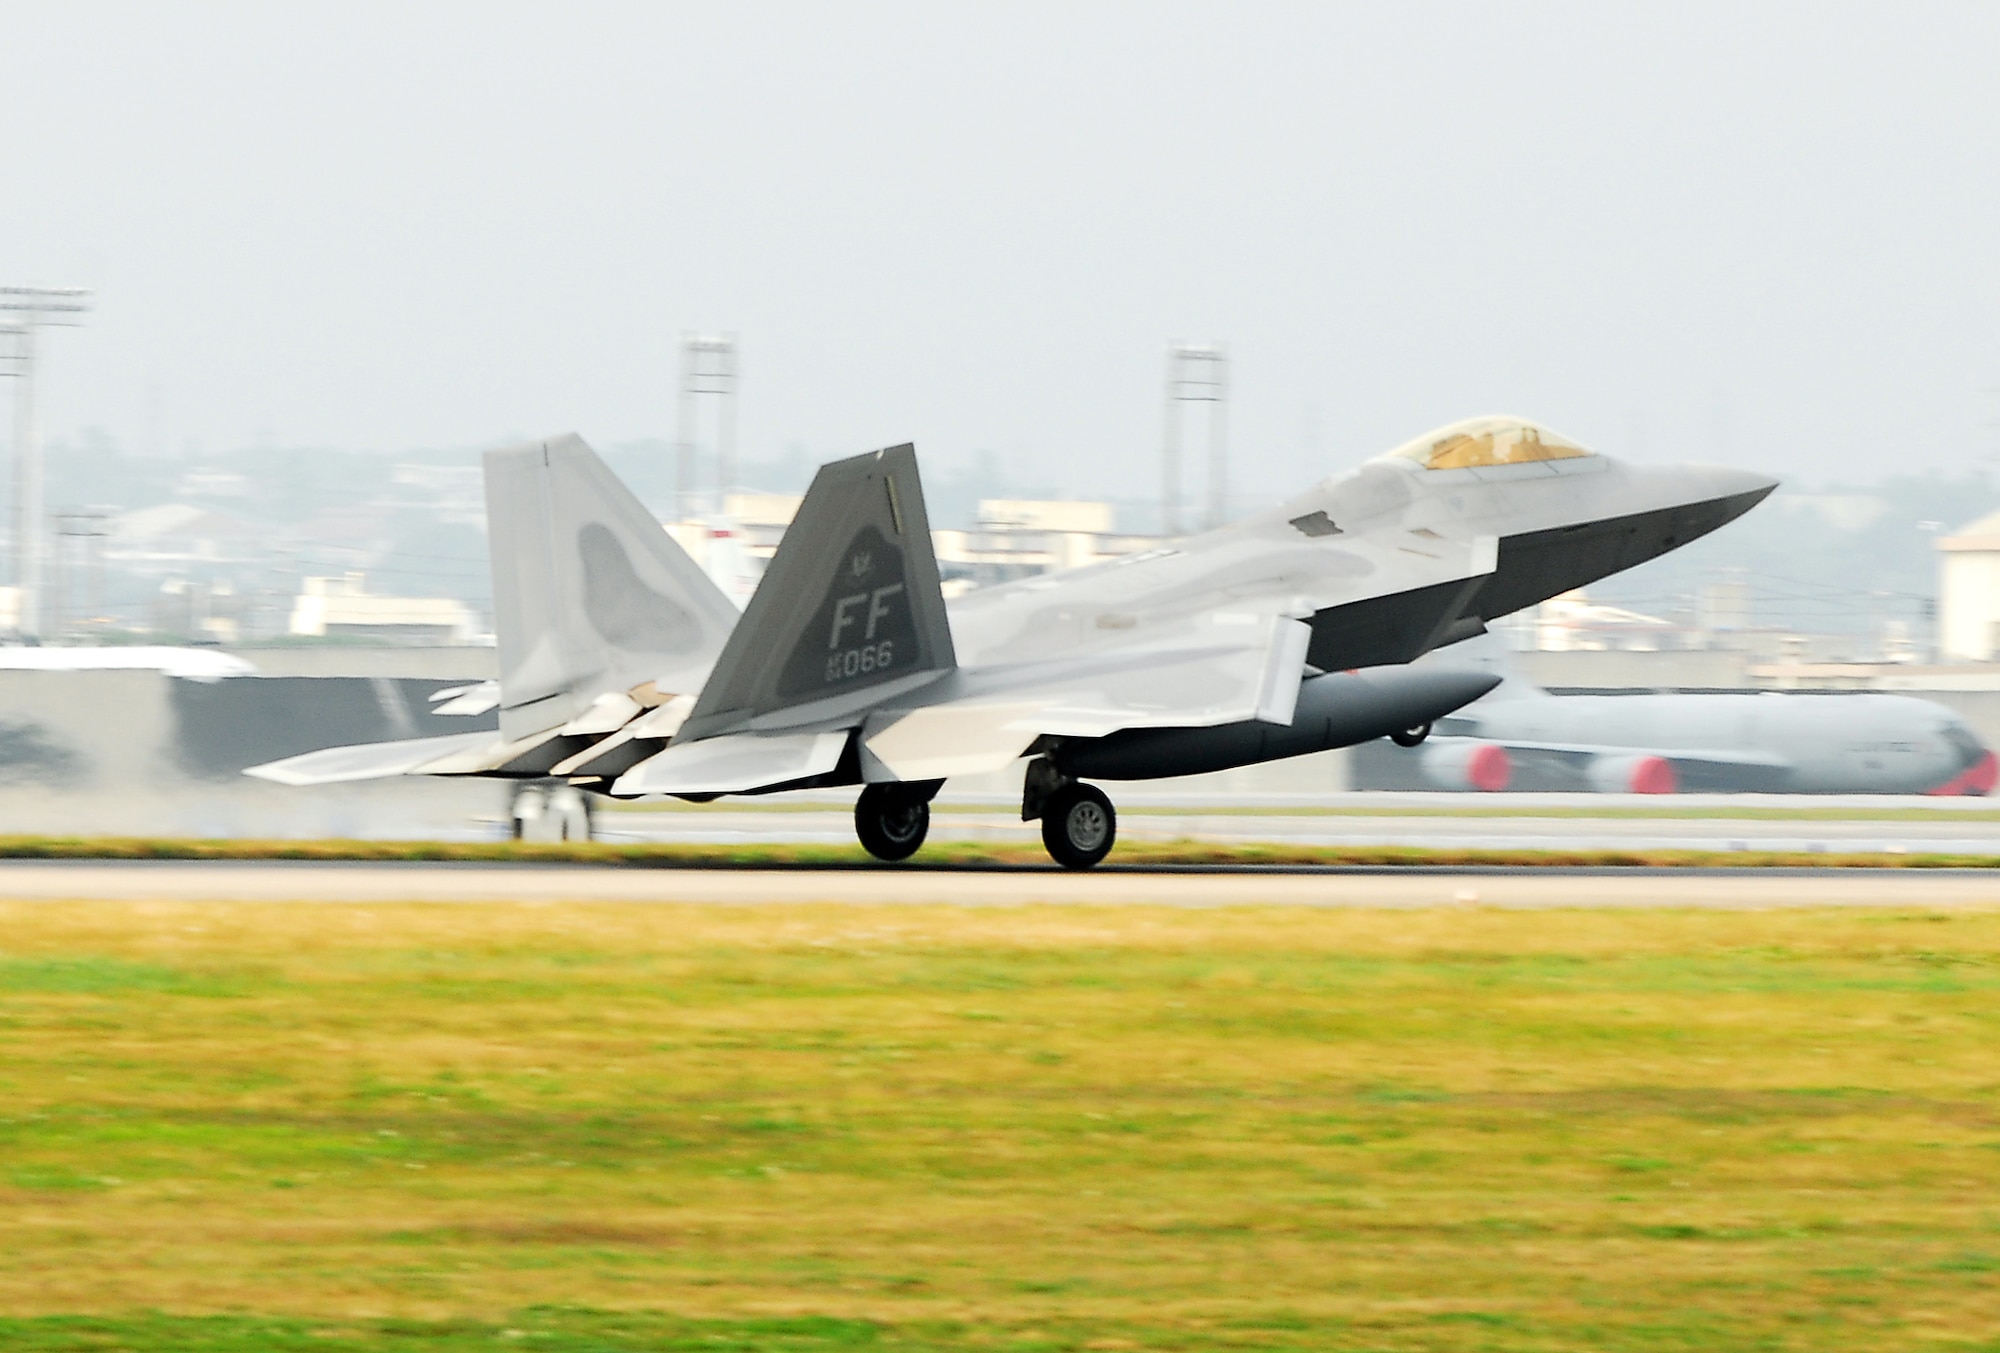 An F-22 Raptor lands at Kadena Air Base, Japan, Feb. 18, marking the aircraft's first overseas deployment. The jet is one of 12 along with more than 250 Airmen deployed from Langley Air Force Base, Va., to Kadena as part of an air expeditionary force rotation. (U.S. Air Force photo/Airman 1st Class Kelly Timney)